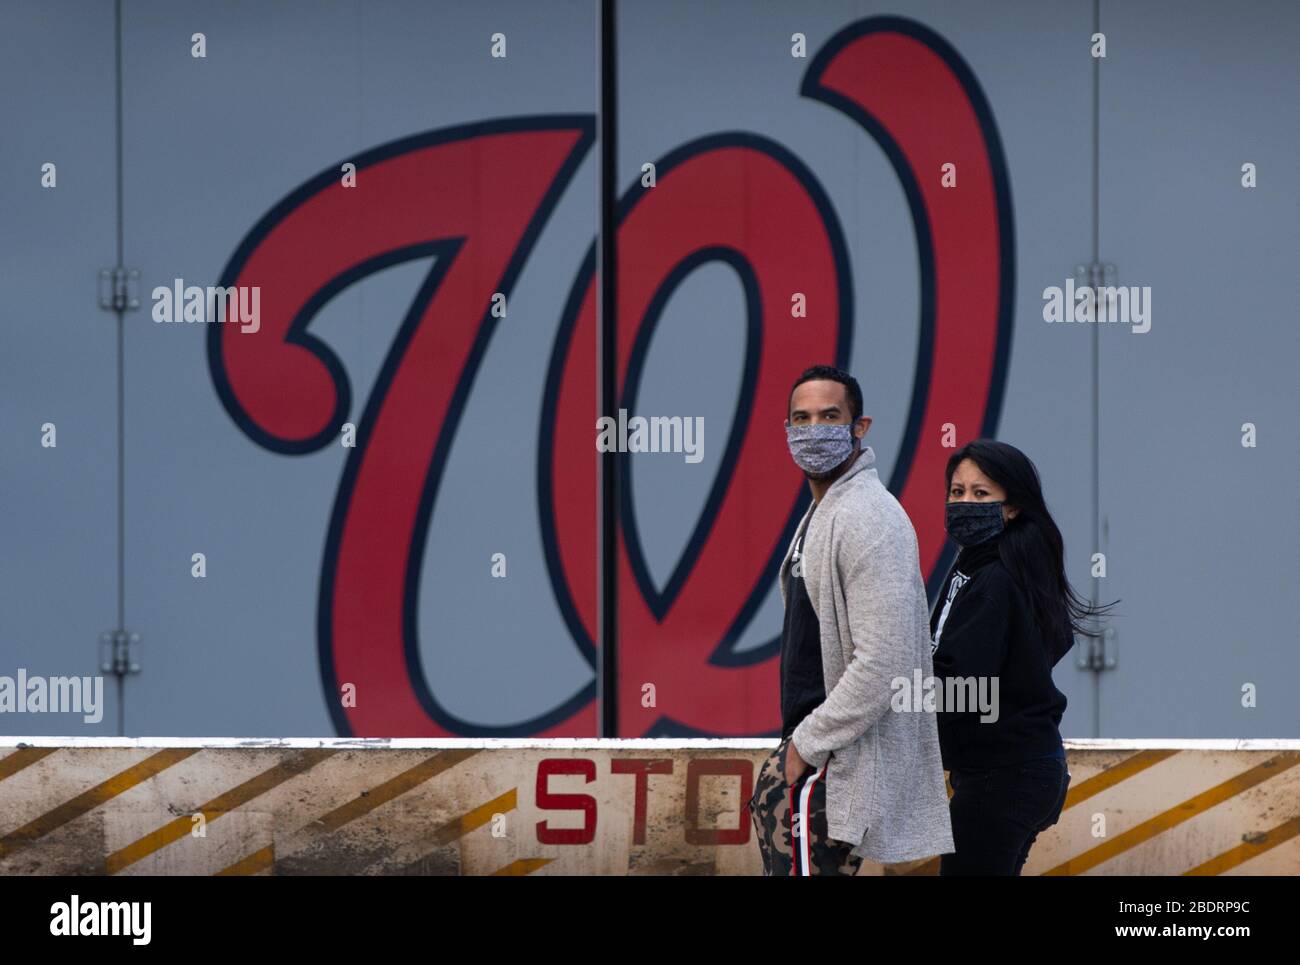 Washington, United States. 09th Apr, 2020. People wearing masks walk past a Washington Nationals logo at Nationals Park in Washington, DC on Thursday, April 9, 2020. World Central Kitchen is using Nationals Park to prepare and distribute food to agencies that help needed individuals during the Coronavirus pandemic. Photo by Kevin Dietsch/UPI Credit: UPI/Alamy Live News Stock Photo